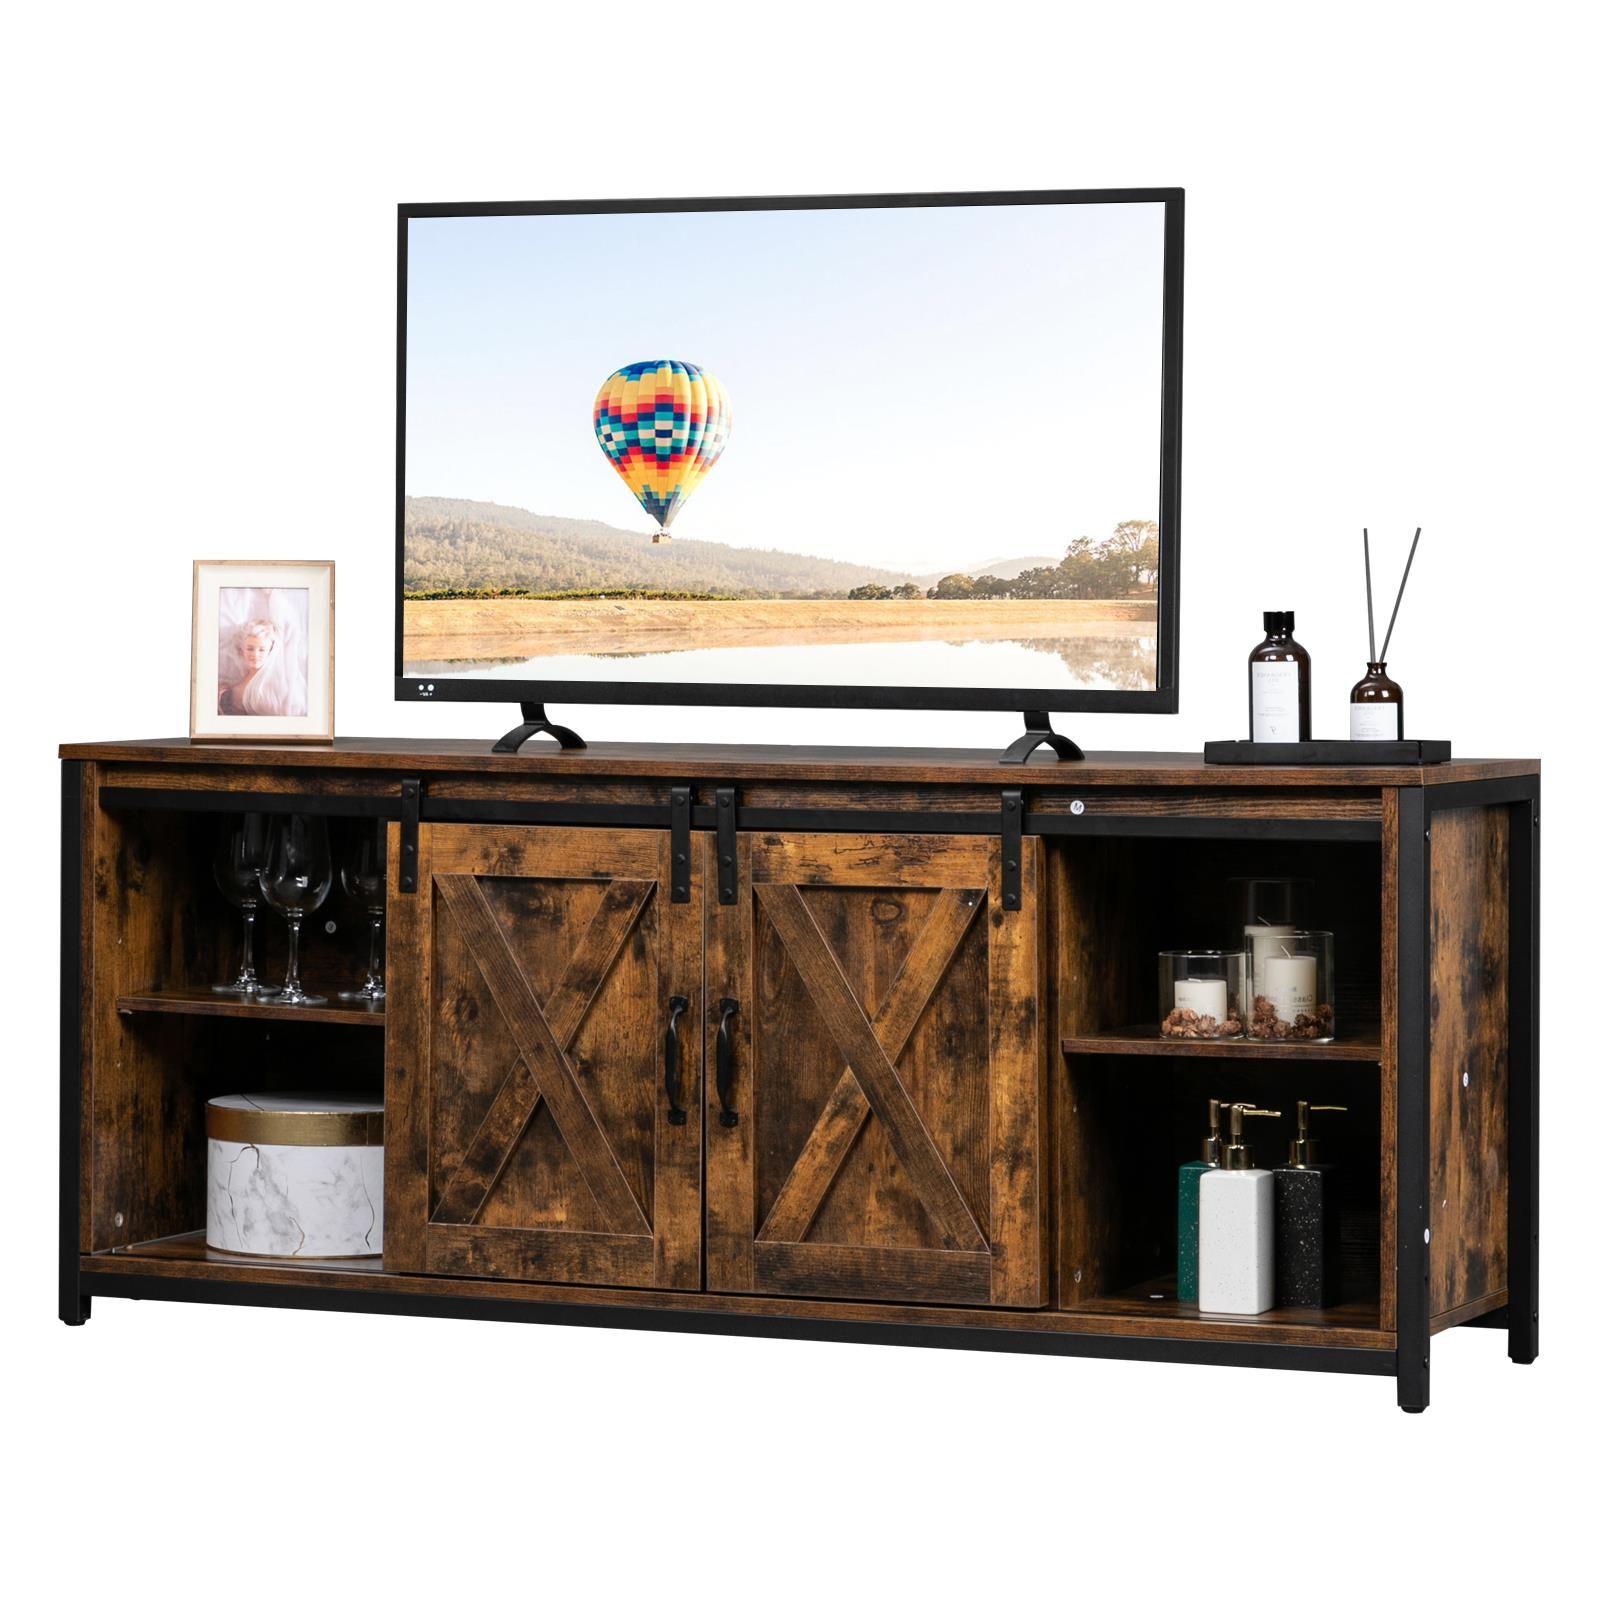 Tv Stands With Sliding Barn Door Console In Rustic Oak Throughout Best And Newest Ktaxon Sliding Barn Doors Tv Stand For 65 Inch Tv (View 5 of 10)